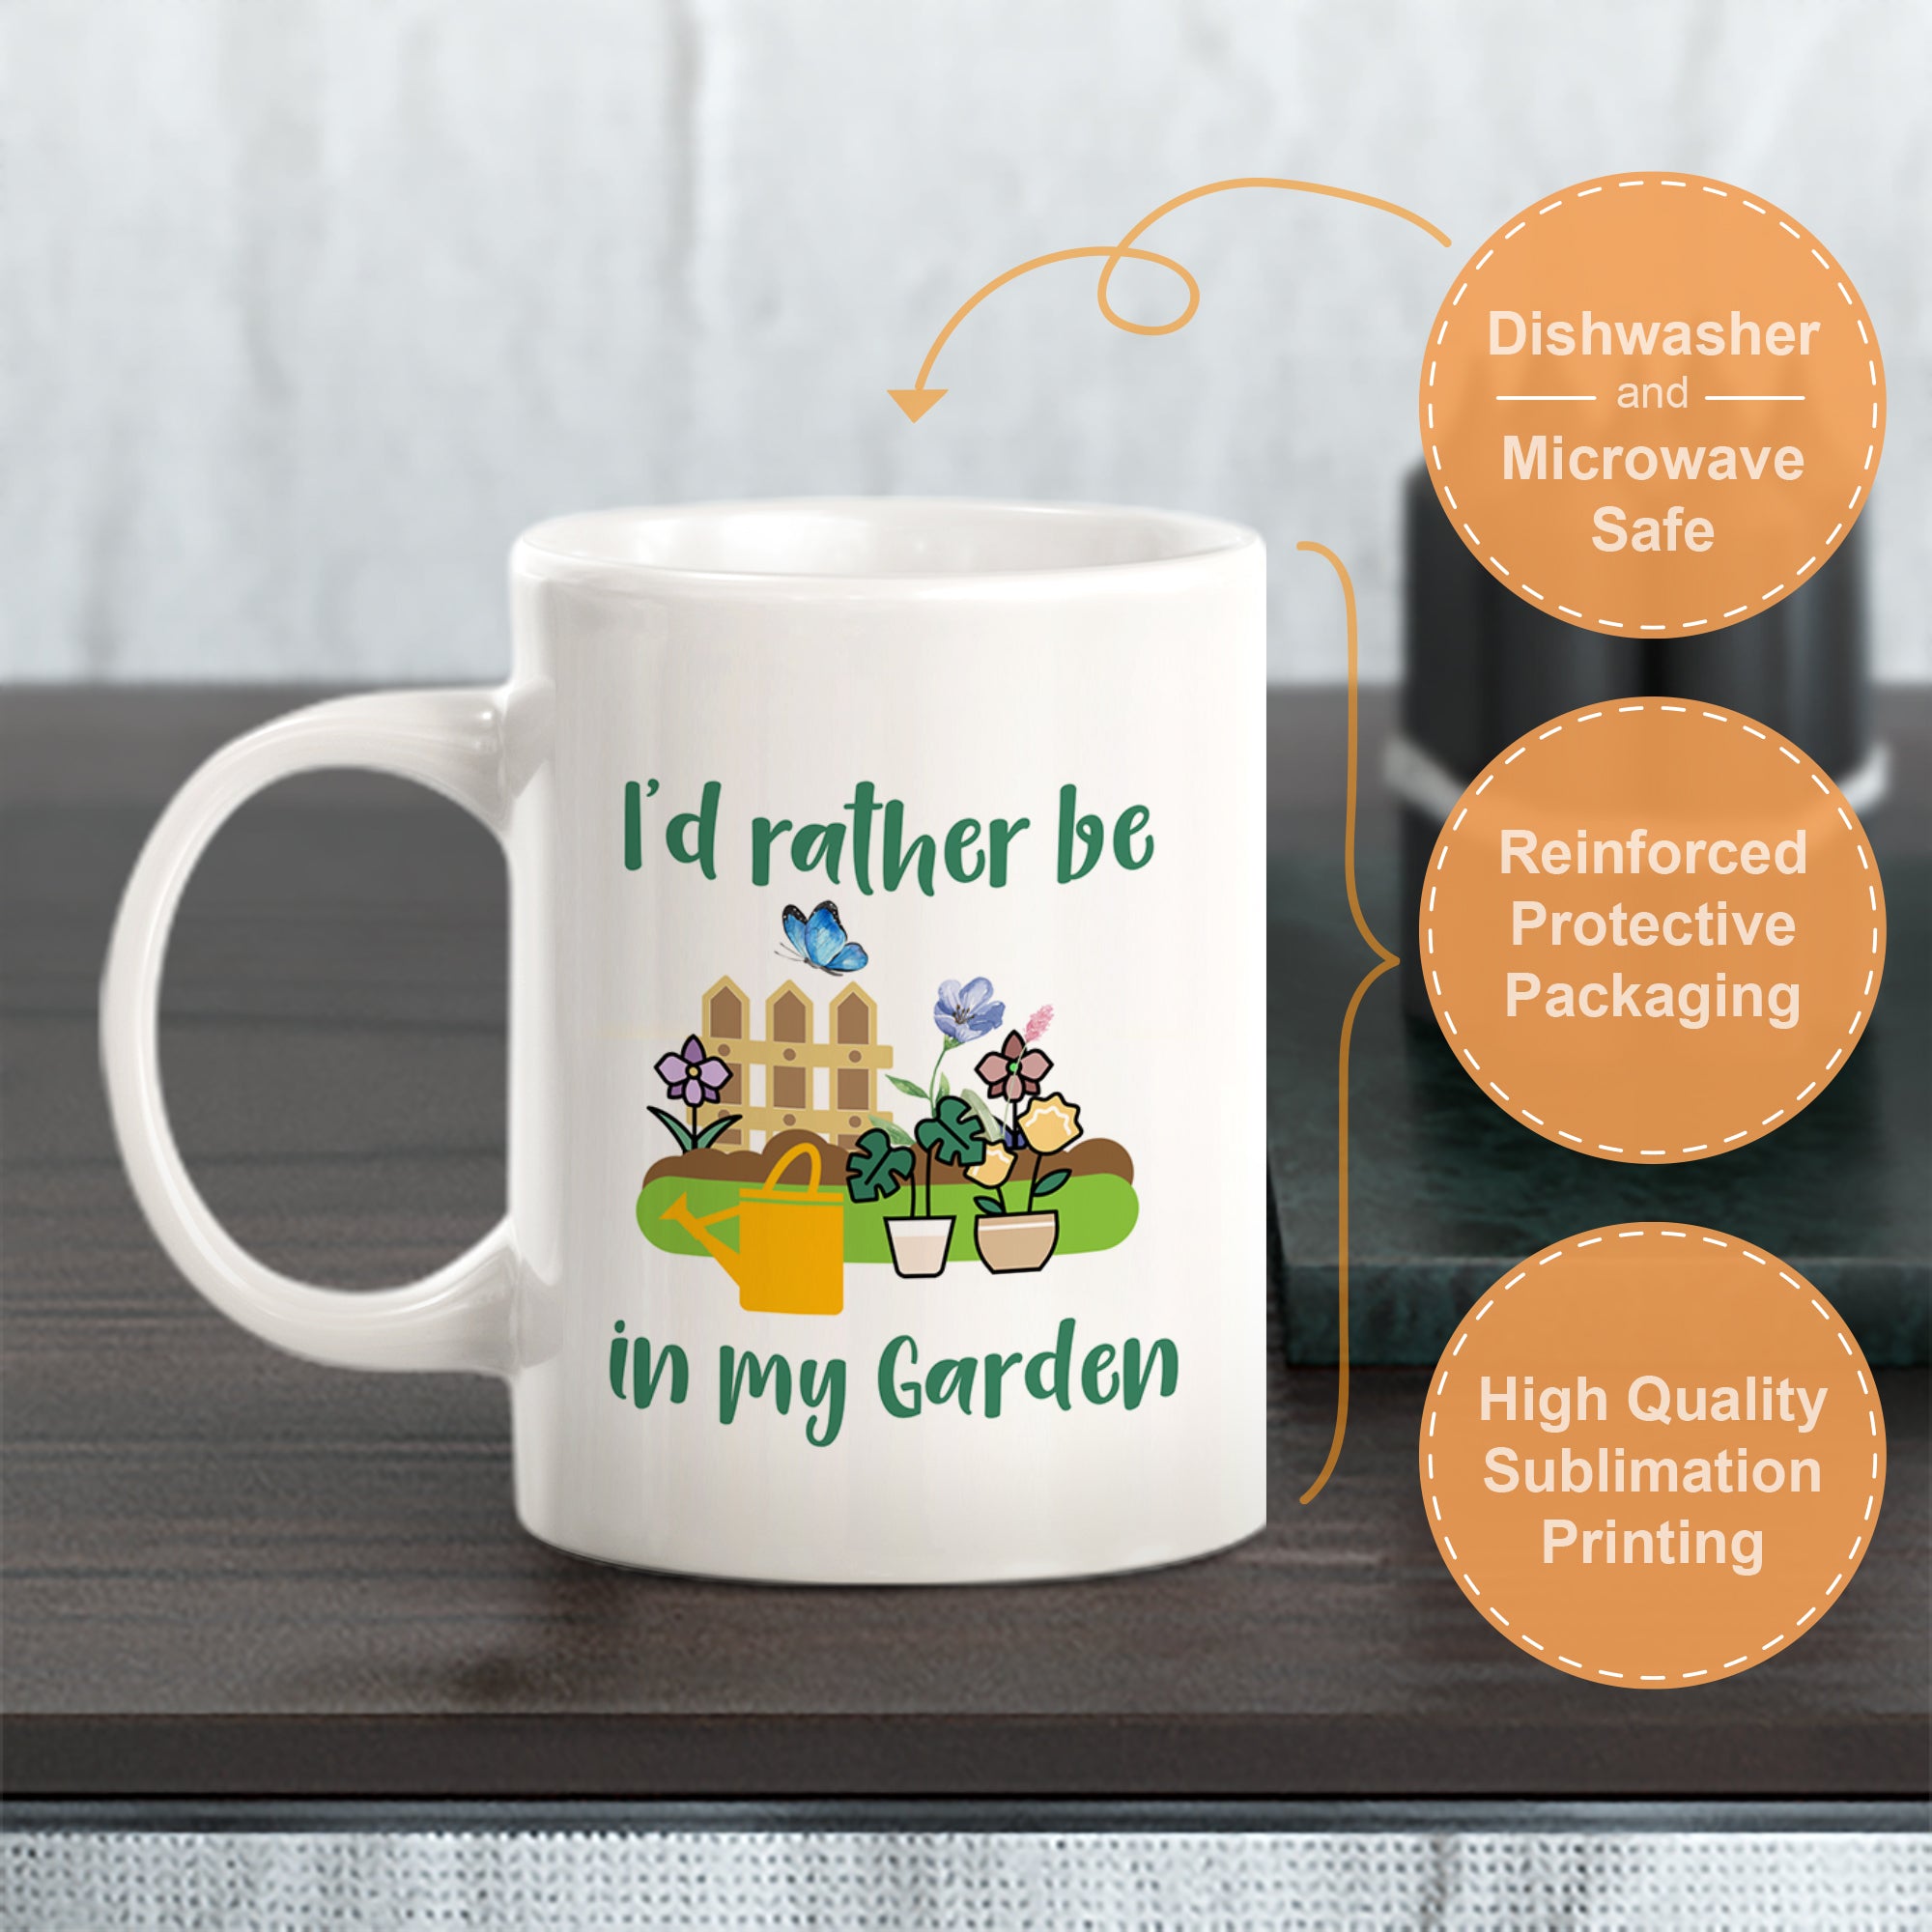 I'd rather be in my Garden Coffee Mug